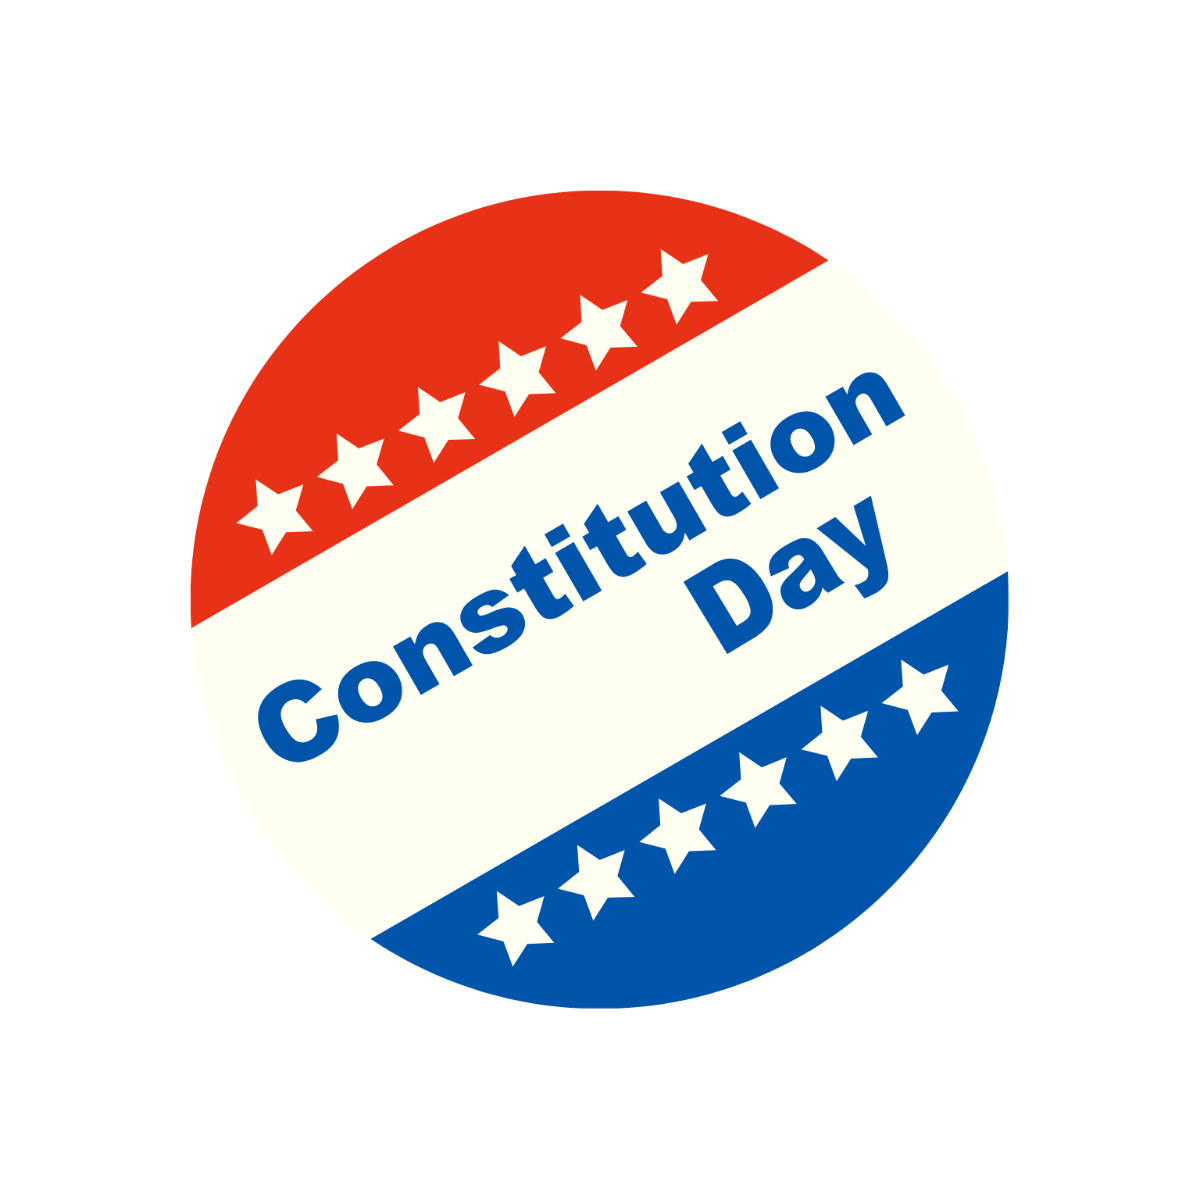 Cute Constitution and Citizenship Day Clip Art Template